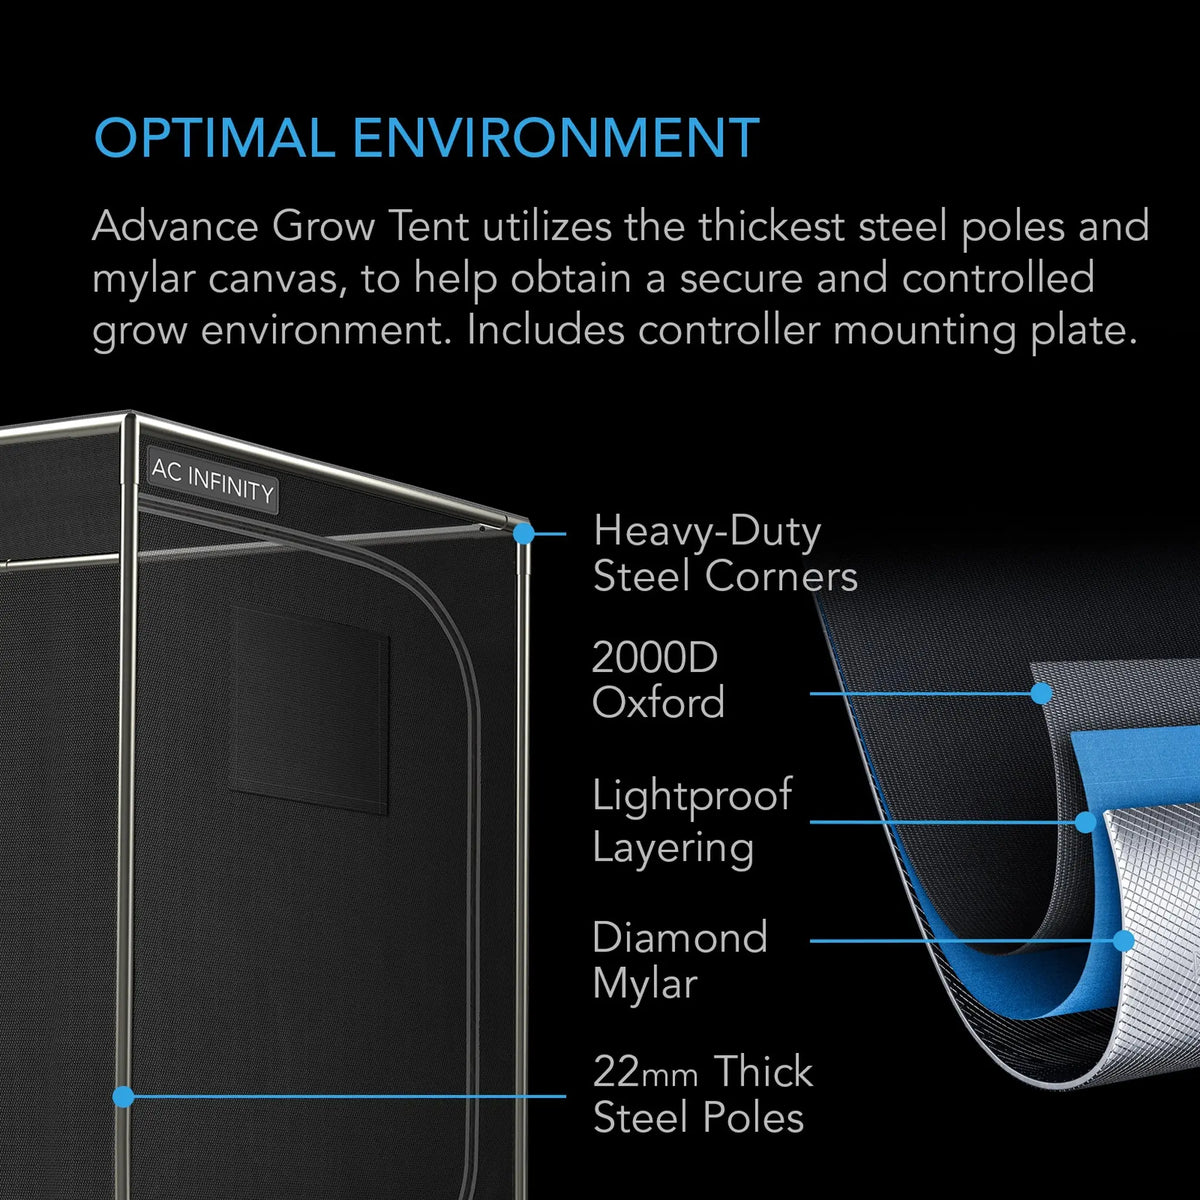 AC Infinity Advance Grow Tent System 2x2 Compact, 1-Plant Kit, Integrated Smart Controls To Automate Ventilation, Circulation, Full Spectrum Led Grow Light AC Infinity